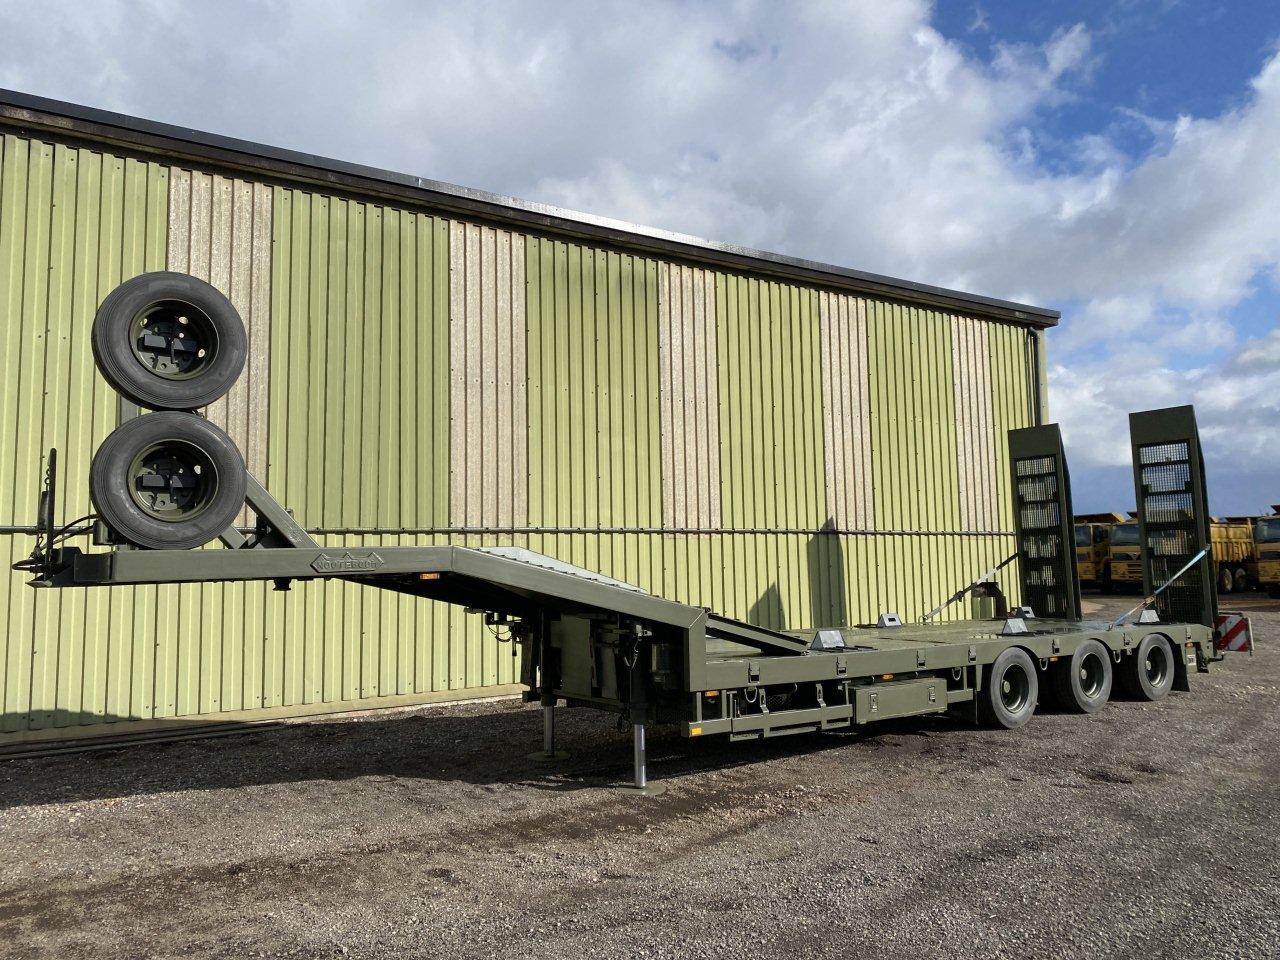 <a href='/index.php/trailers/low-loader-trailers/50421-nooteboom-semi-low-loader-trailer-50421' title='Read more...' class='joodb_titletink'>Nooteboom Semi Low Loader Trailer - 50421</a>